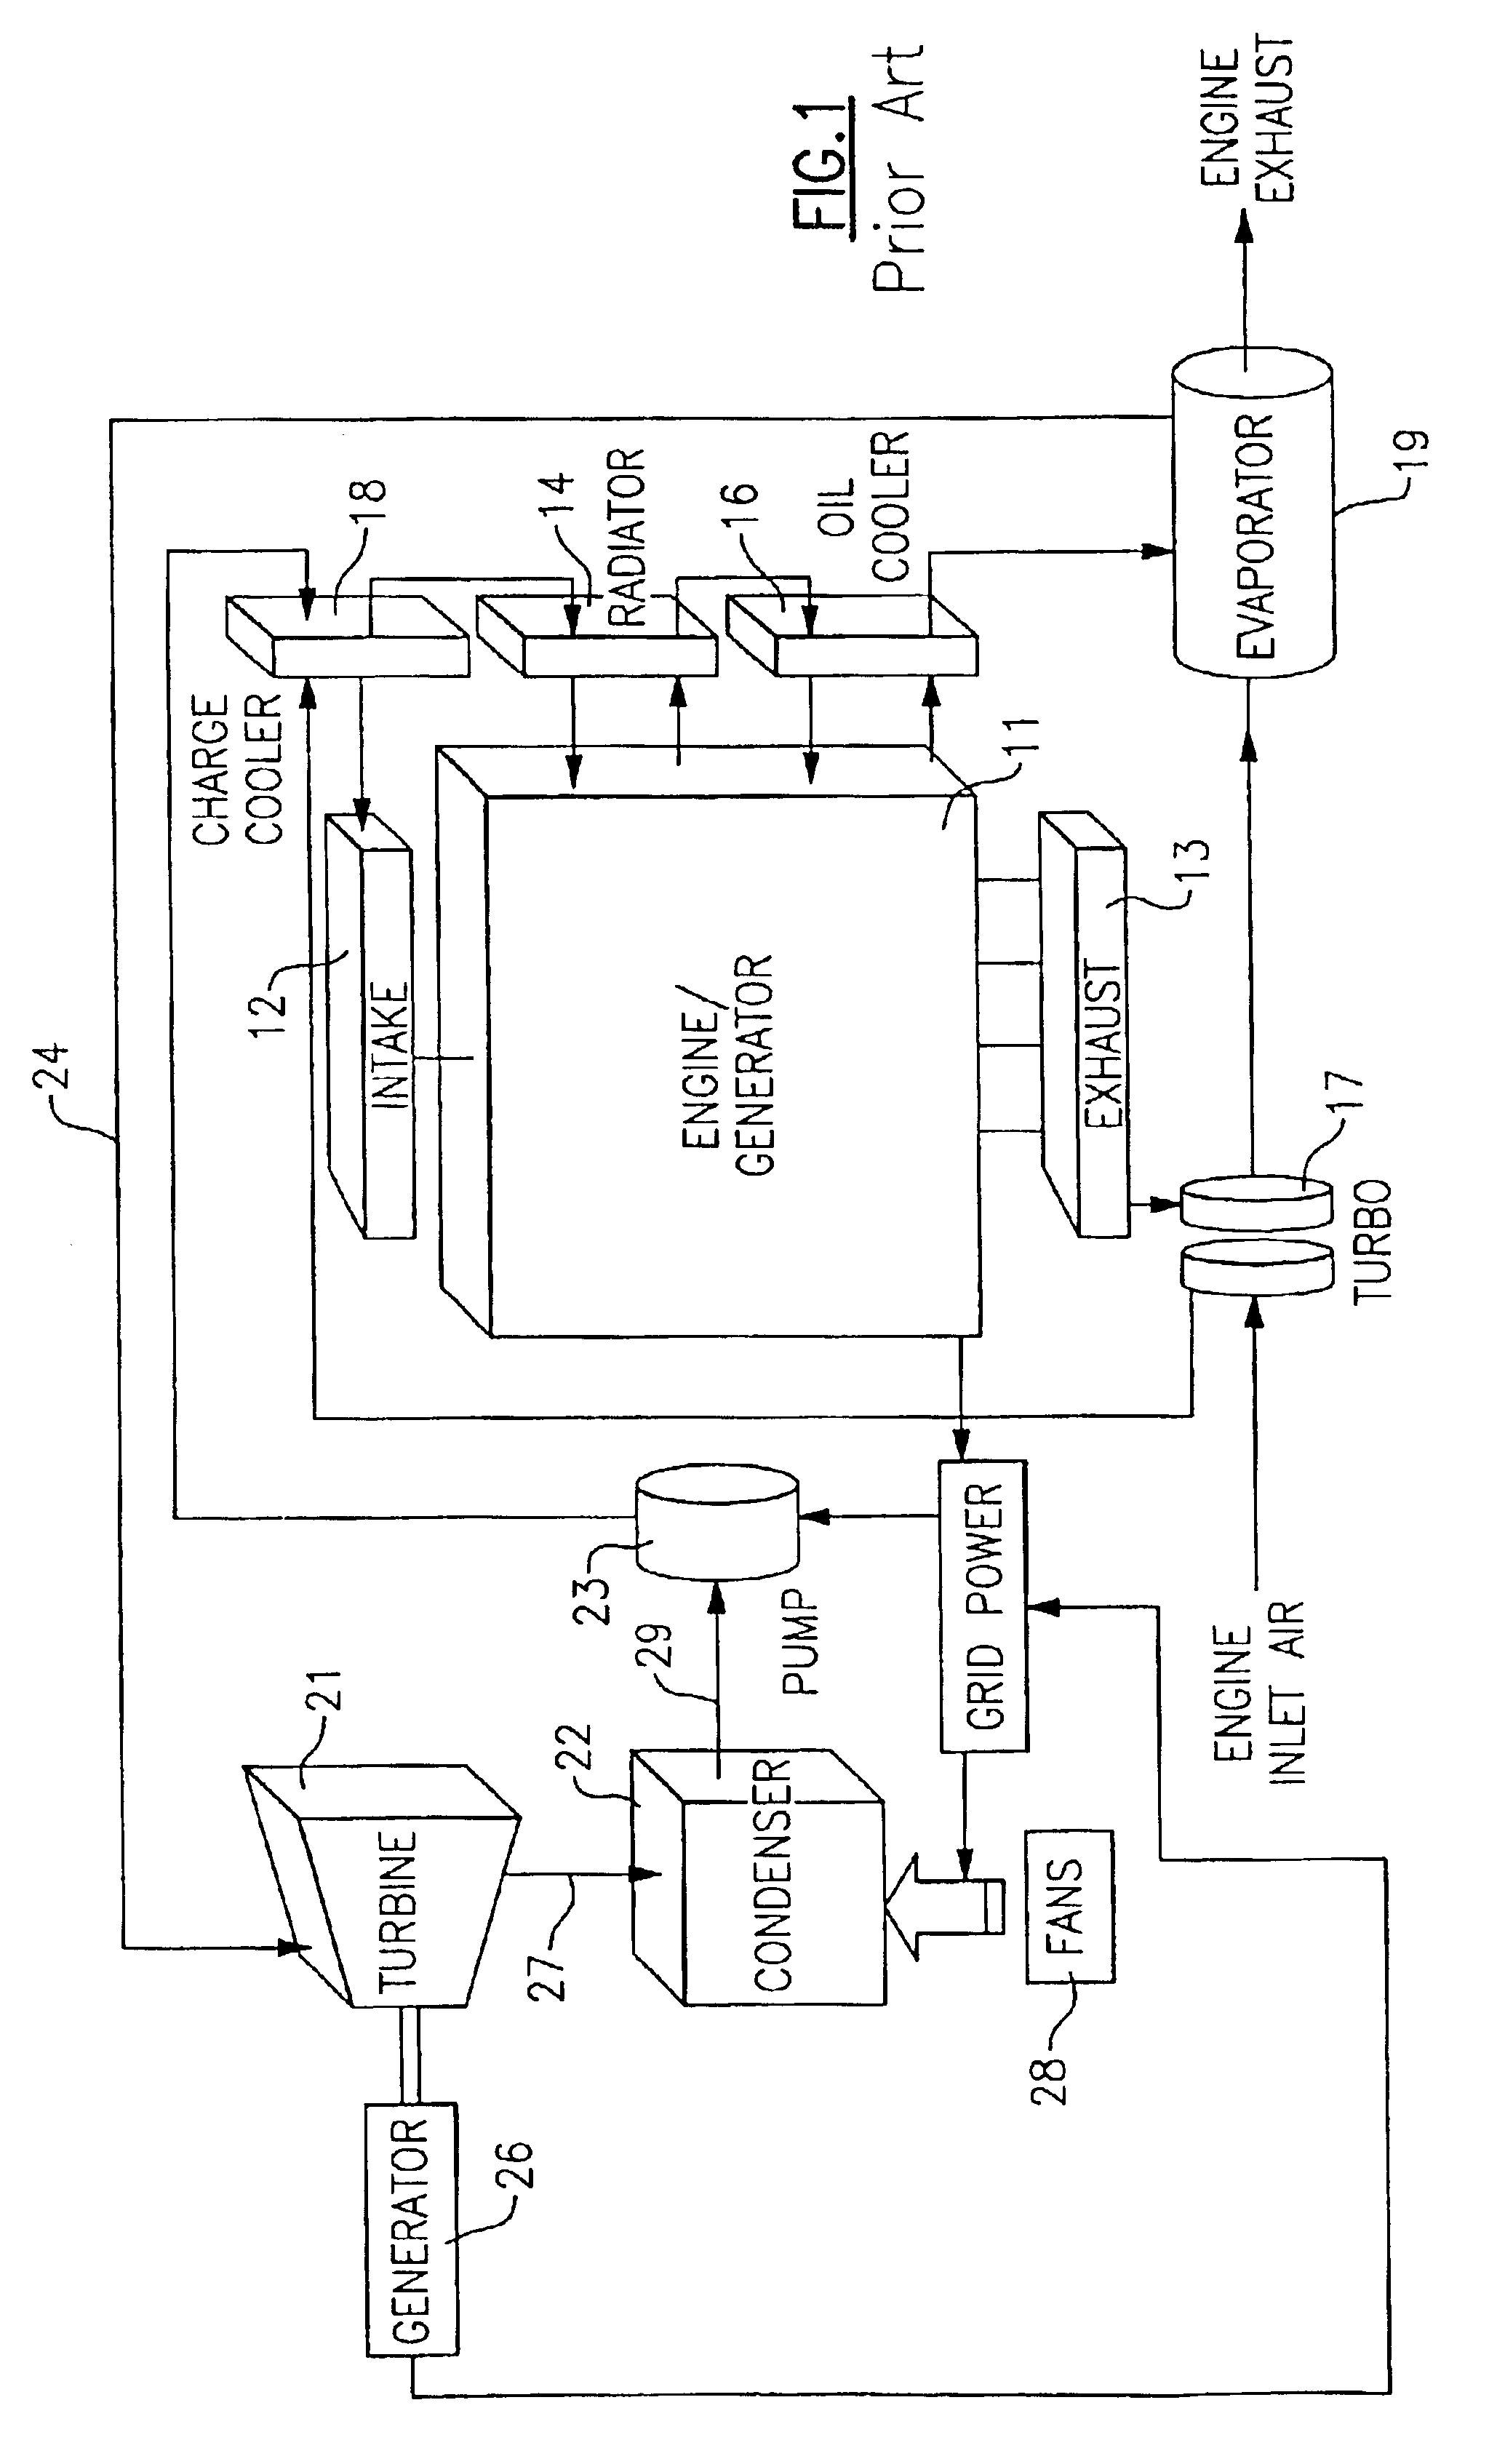 Organic rankine cycle system for use with a reciprocating engine